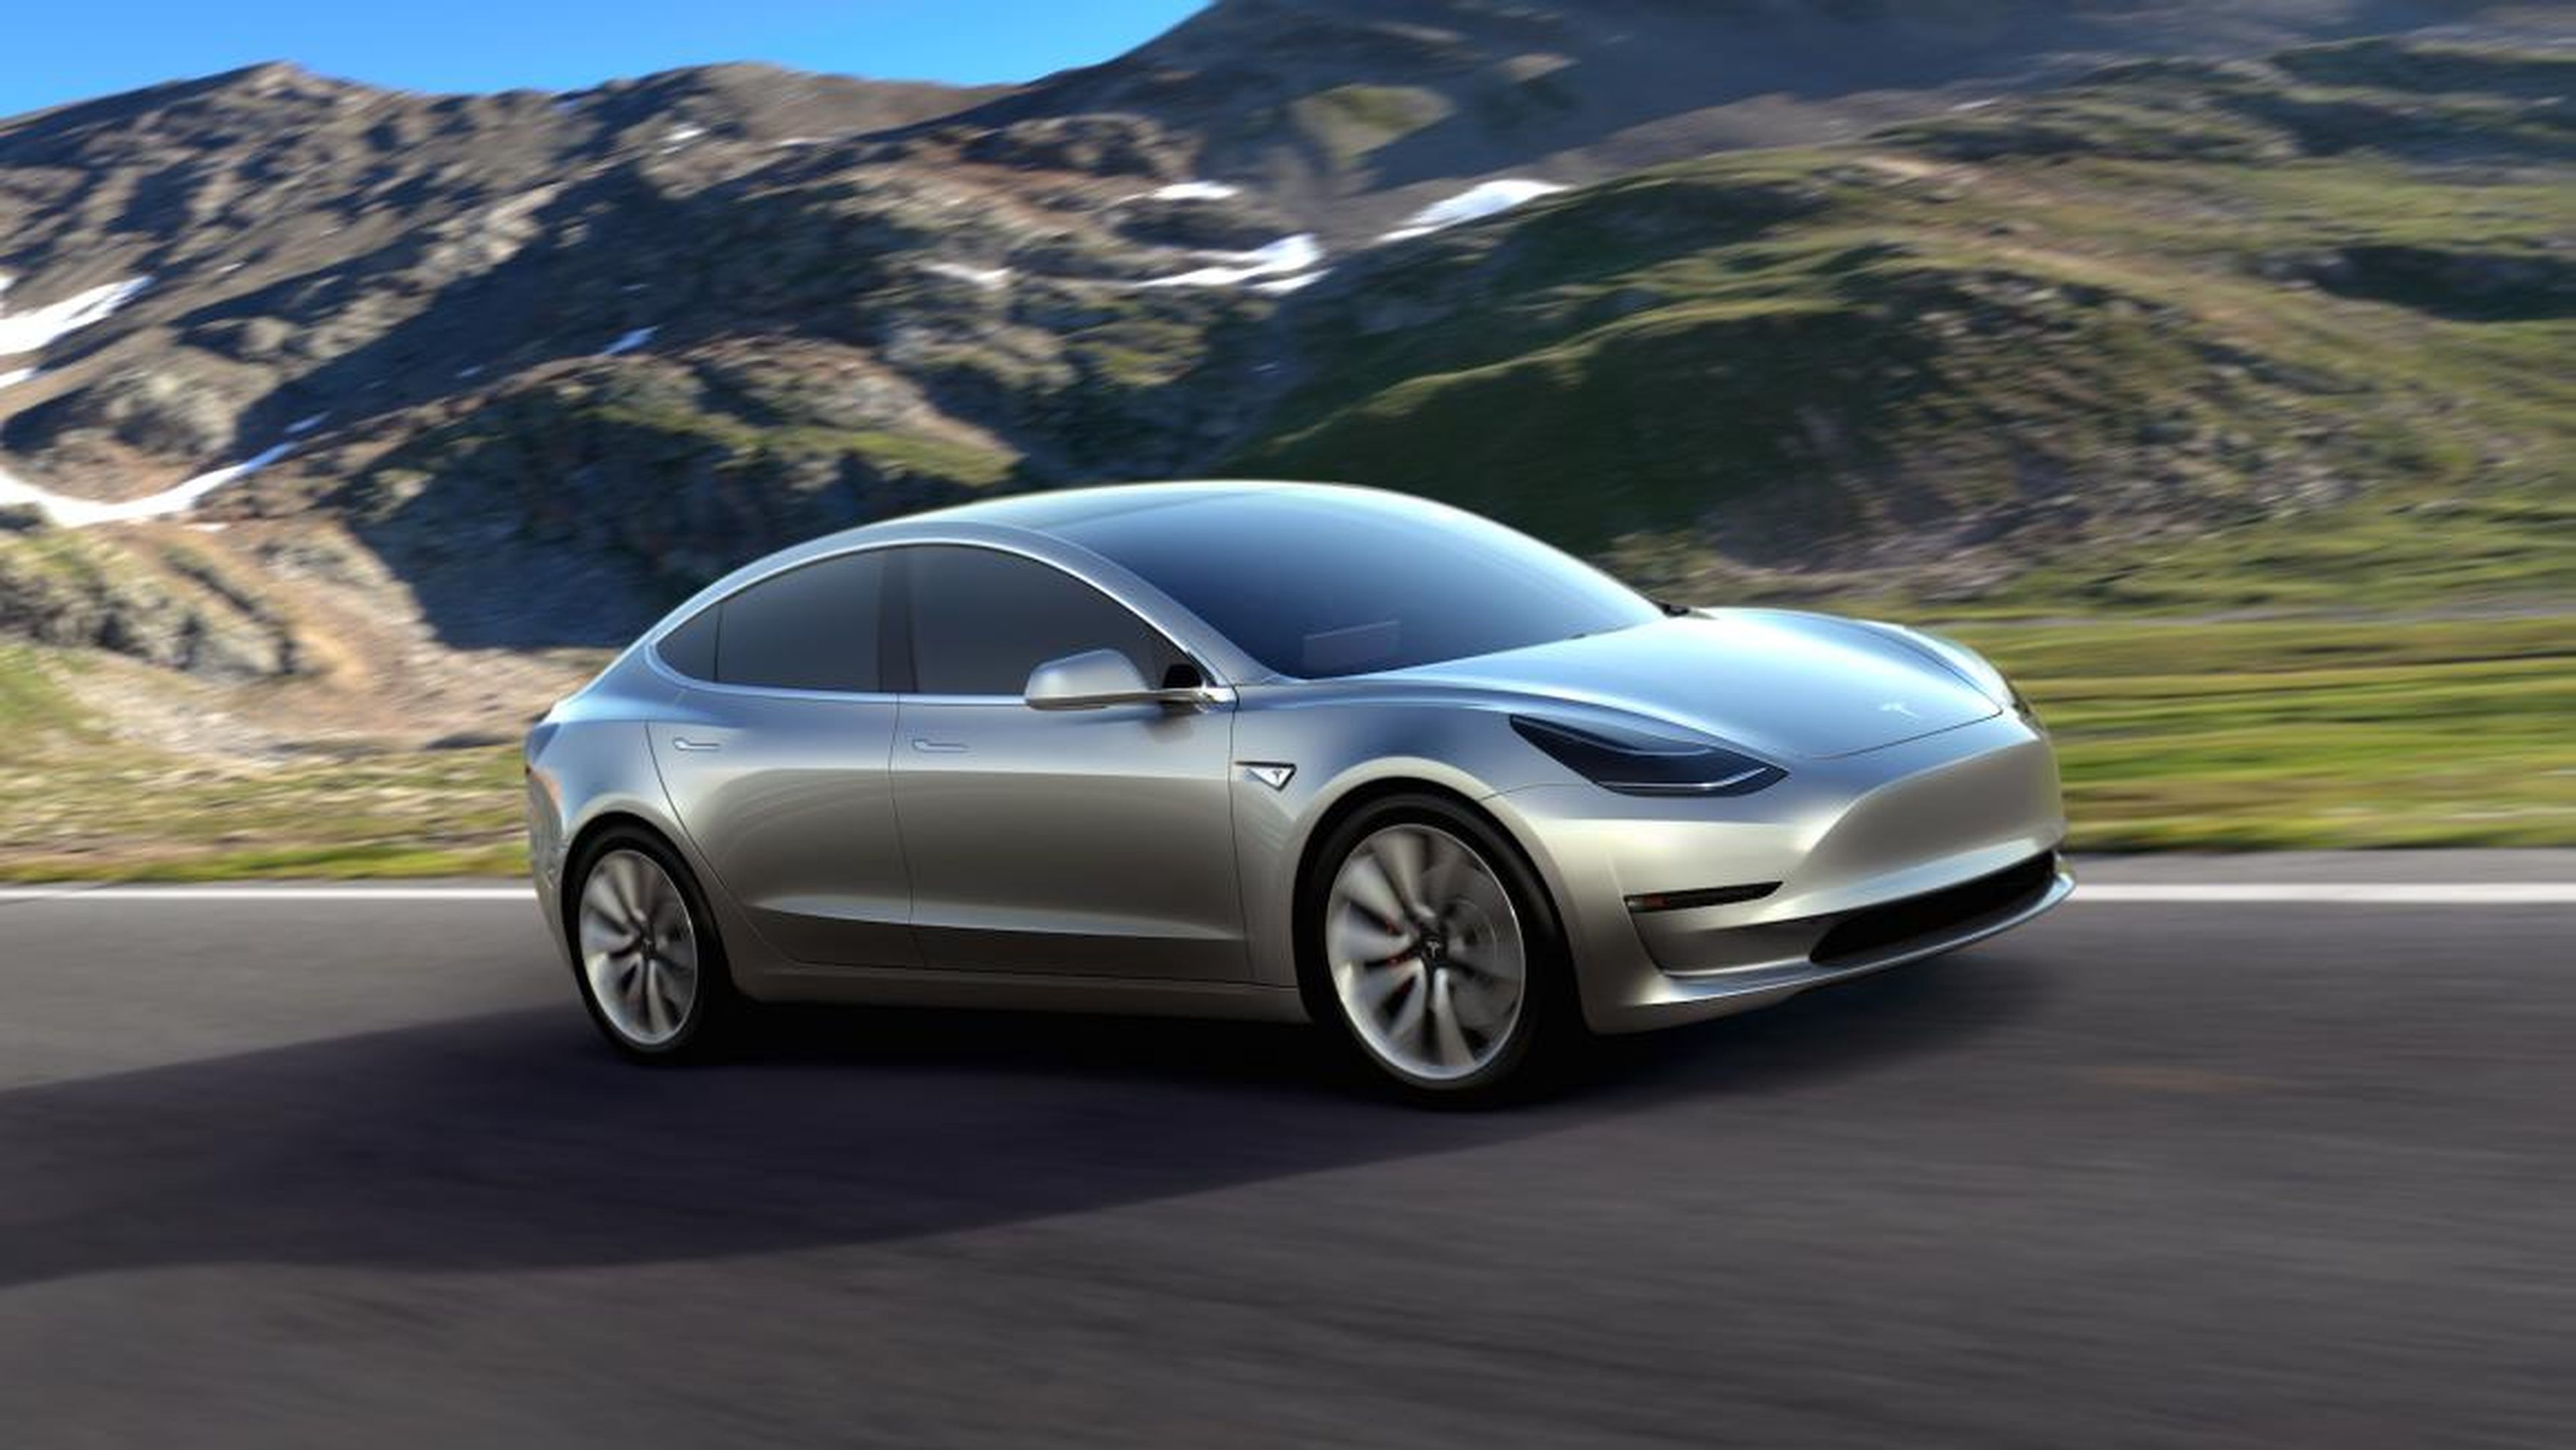 3. The standard Model 3 features rear-wheel drive. The Model 3 Performance features a dual-motor all-wheel drive system, which makes it better for handling more extreme conditions like snowy or rough terrain.